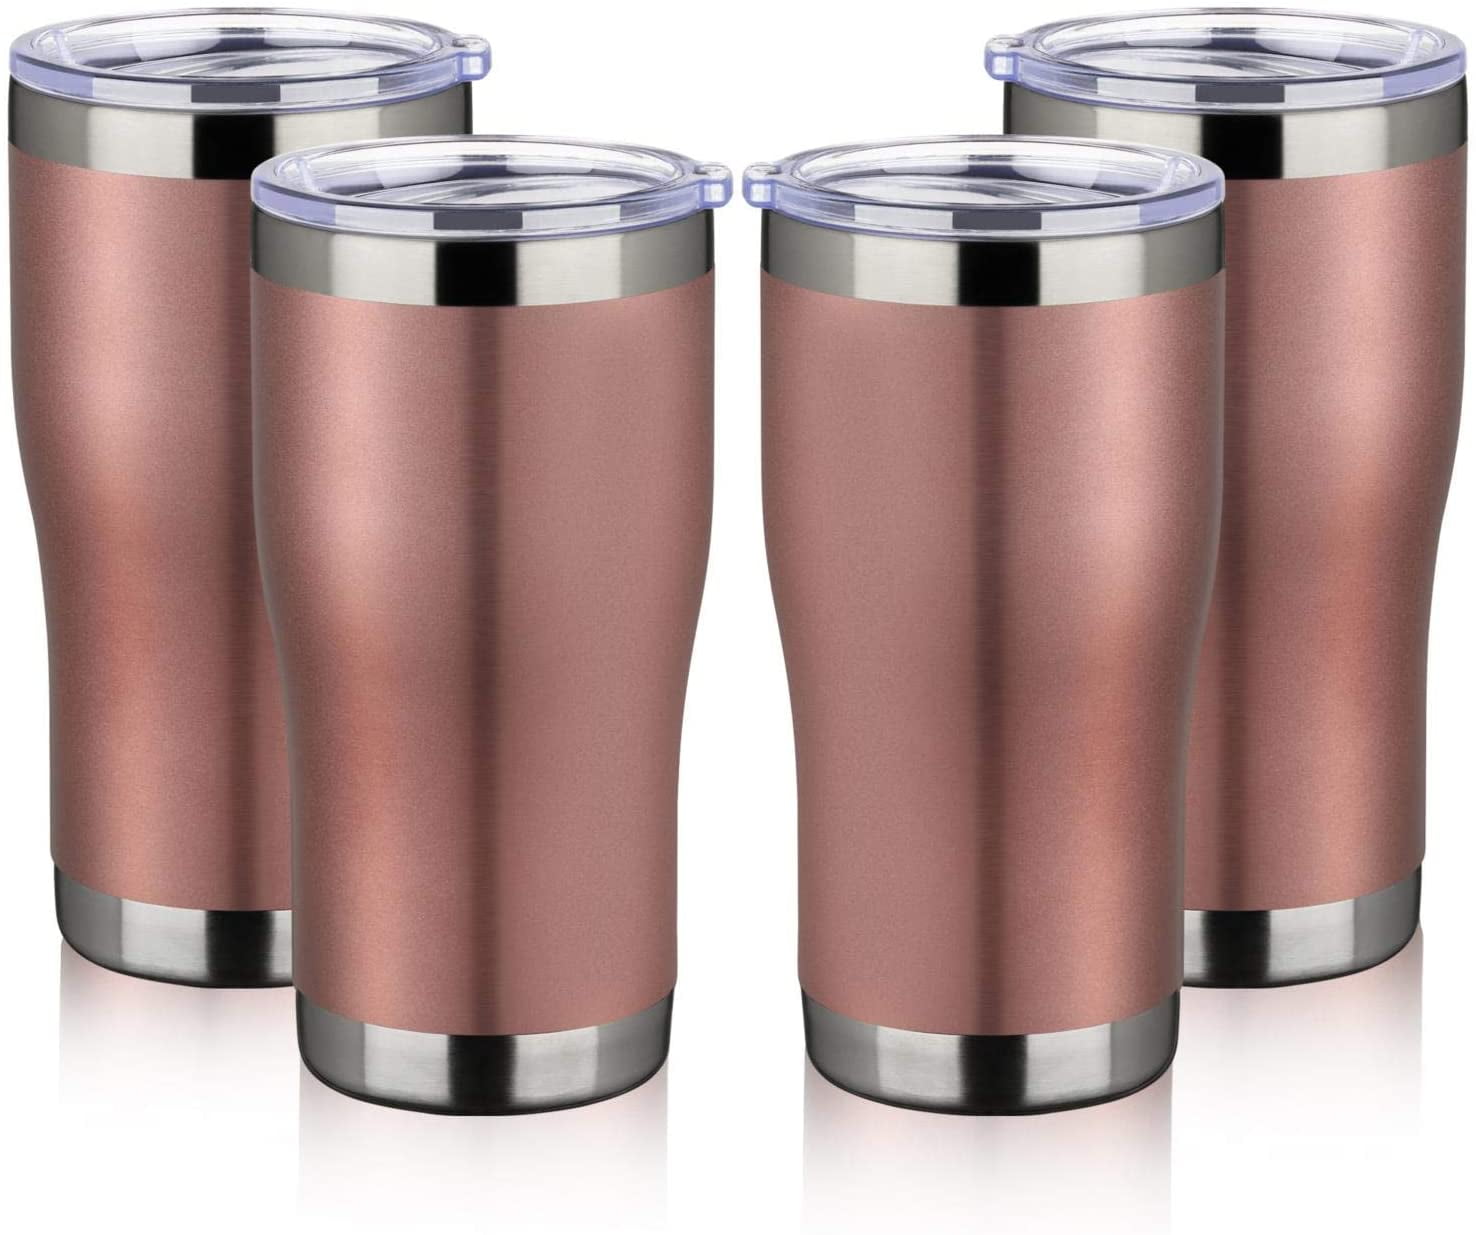 MEWAY 20oz Stainless Steel Tumblers 4 Pack Bulk,Vacuum Insulated Coffee Stainless Steel Cups With Lids Bulk